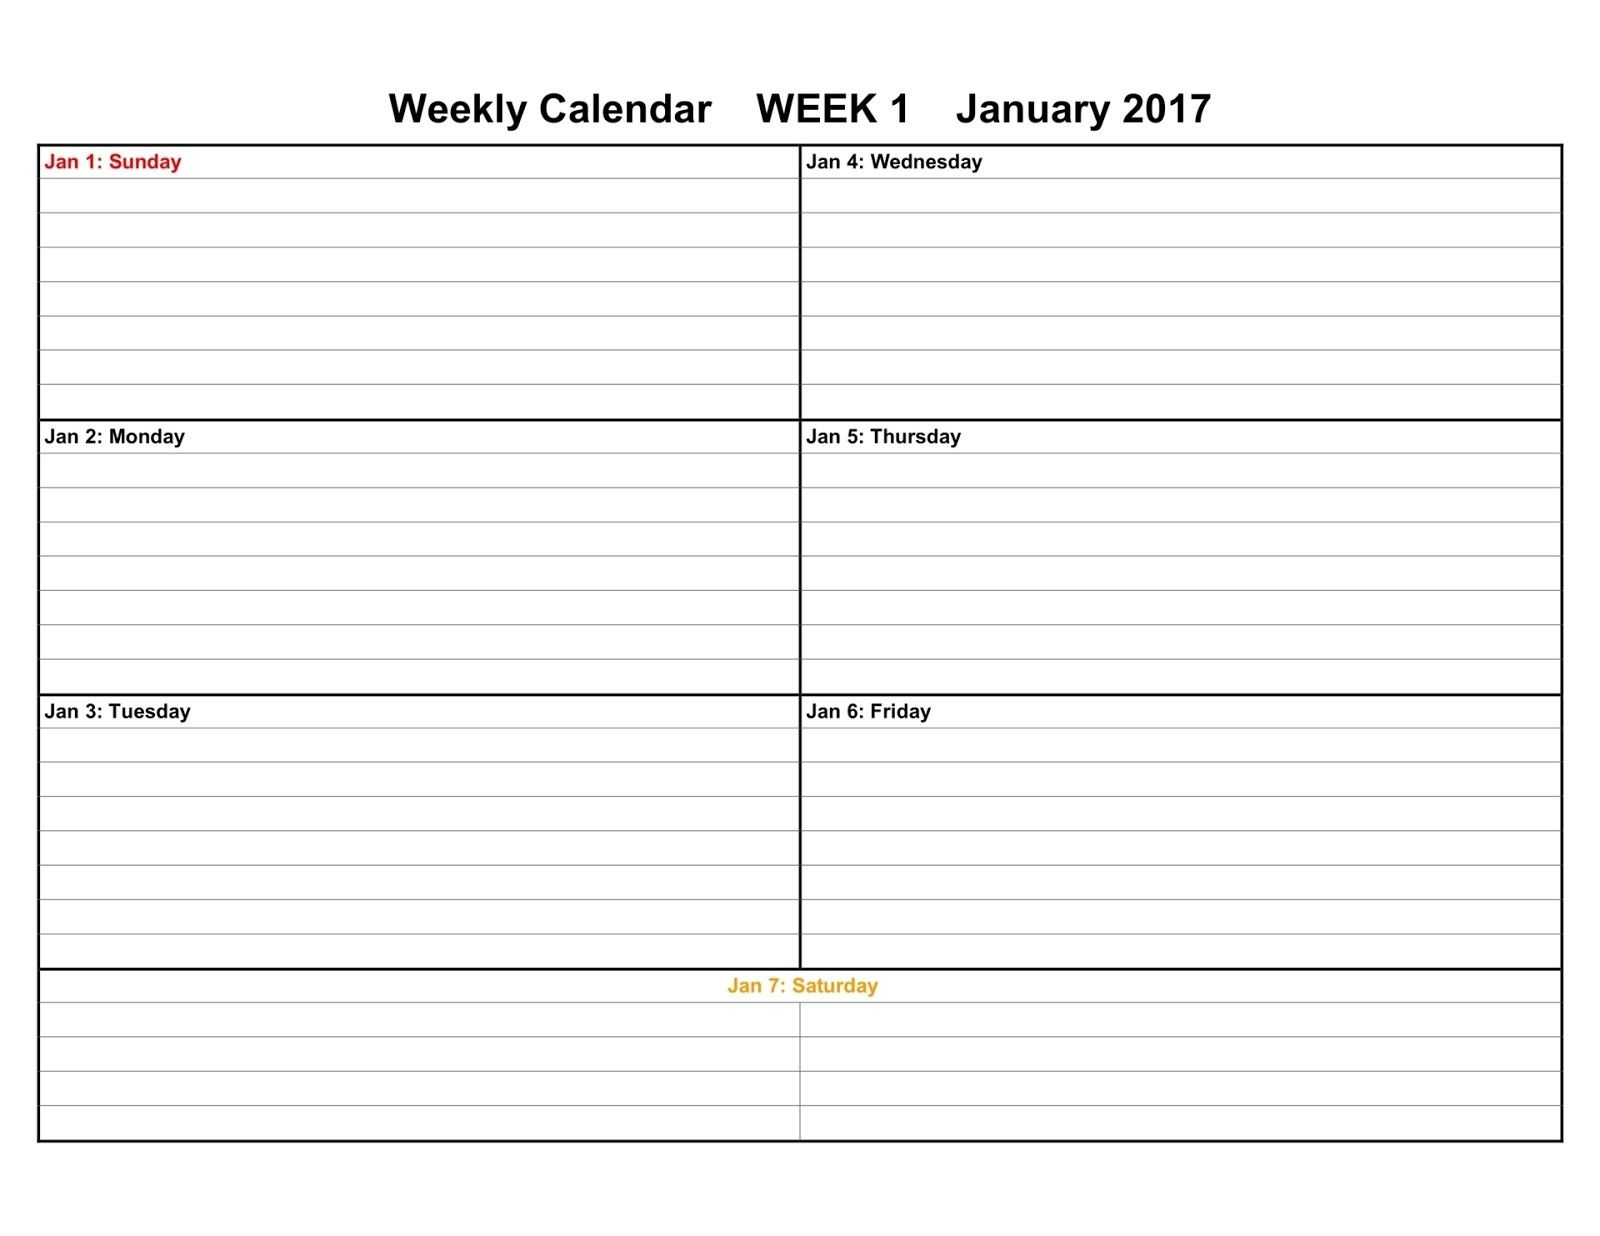 Printable Weekly Calendar within dimensions 1600 X 1236